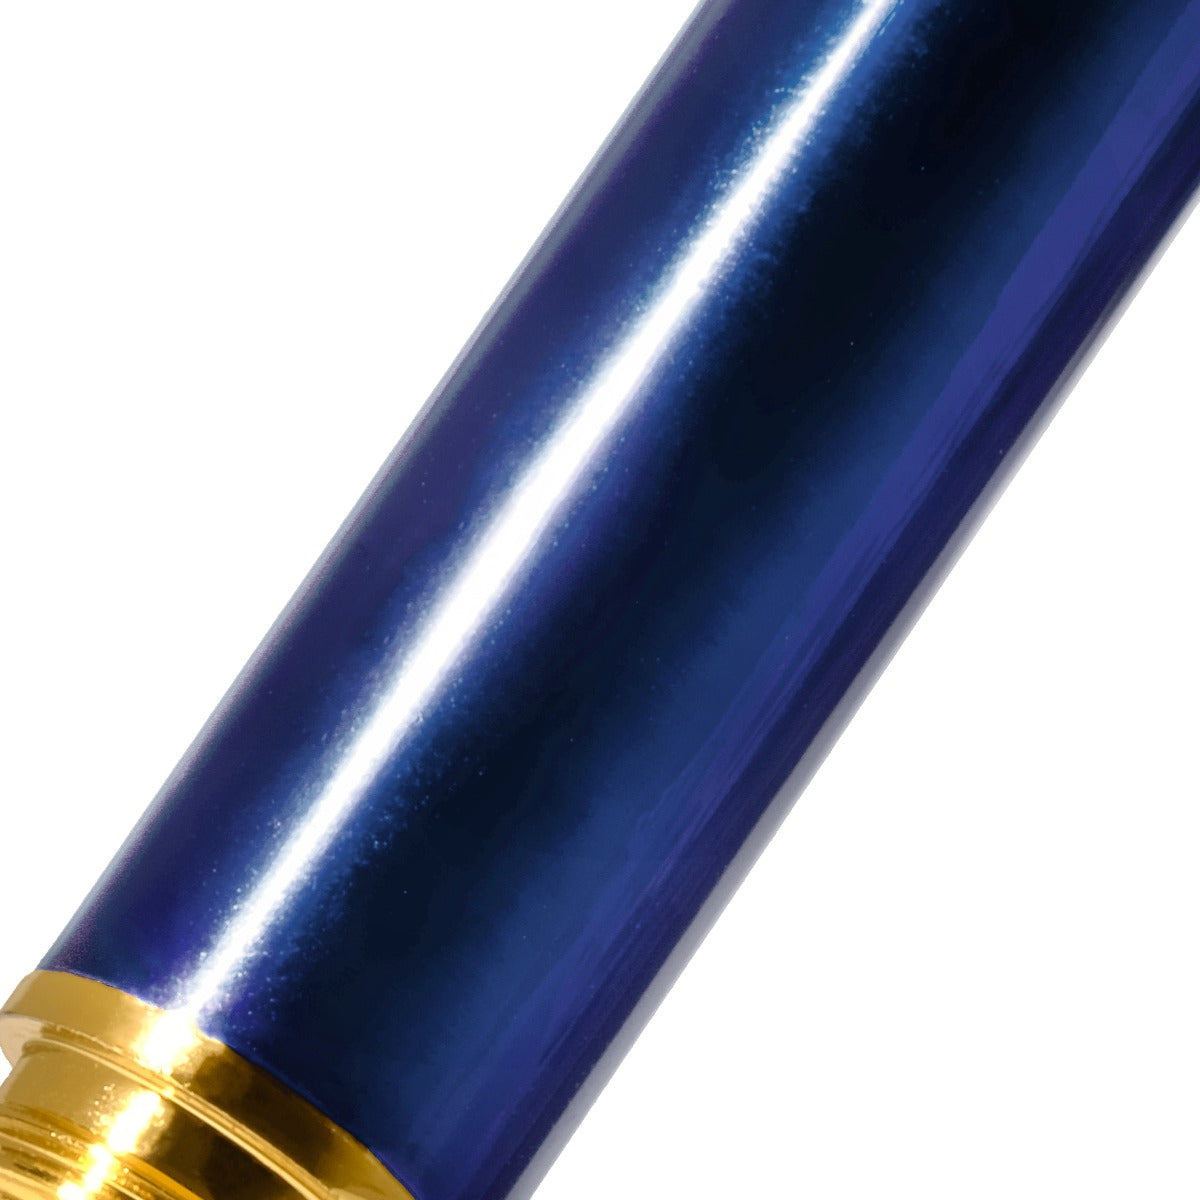 Close-up of sapphire blue fountain pen with lacquer finish on a white background. Wordkind.